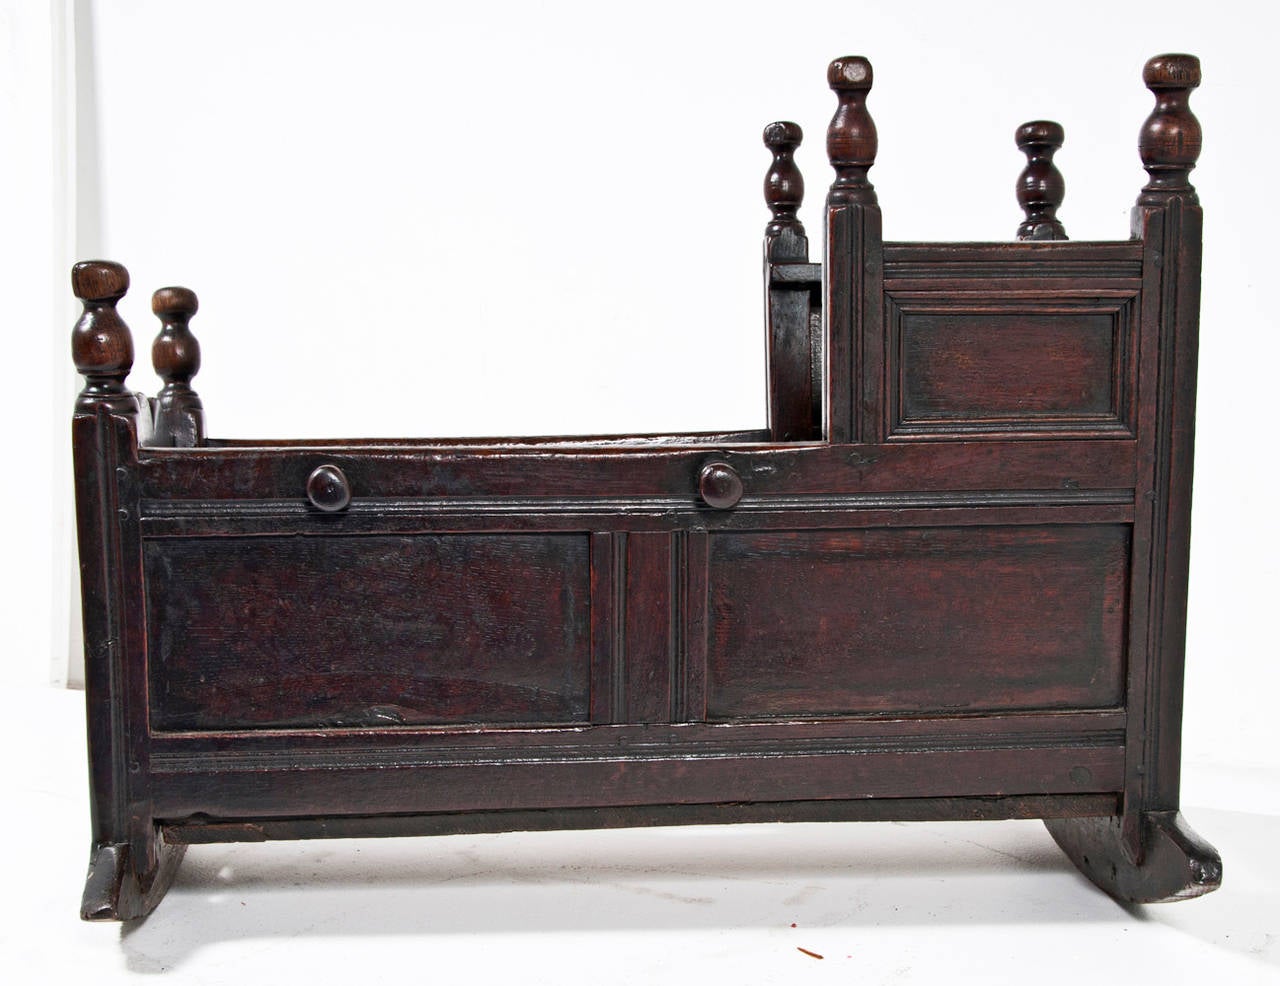 Rare English oak dated cradle, circa 1706. Good color with attractive finials originally used for tie on covers. Great color and patina with most probably original finish. Found in the lake District Cumbria England. From a very good collection.